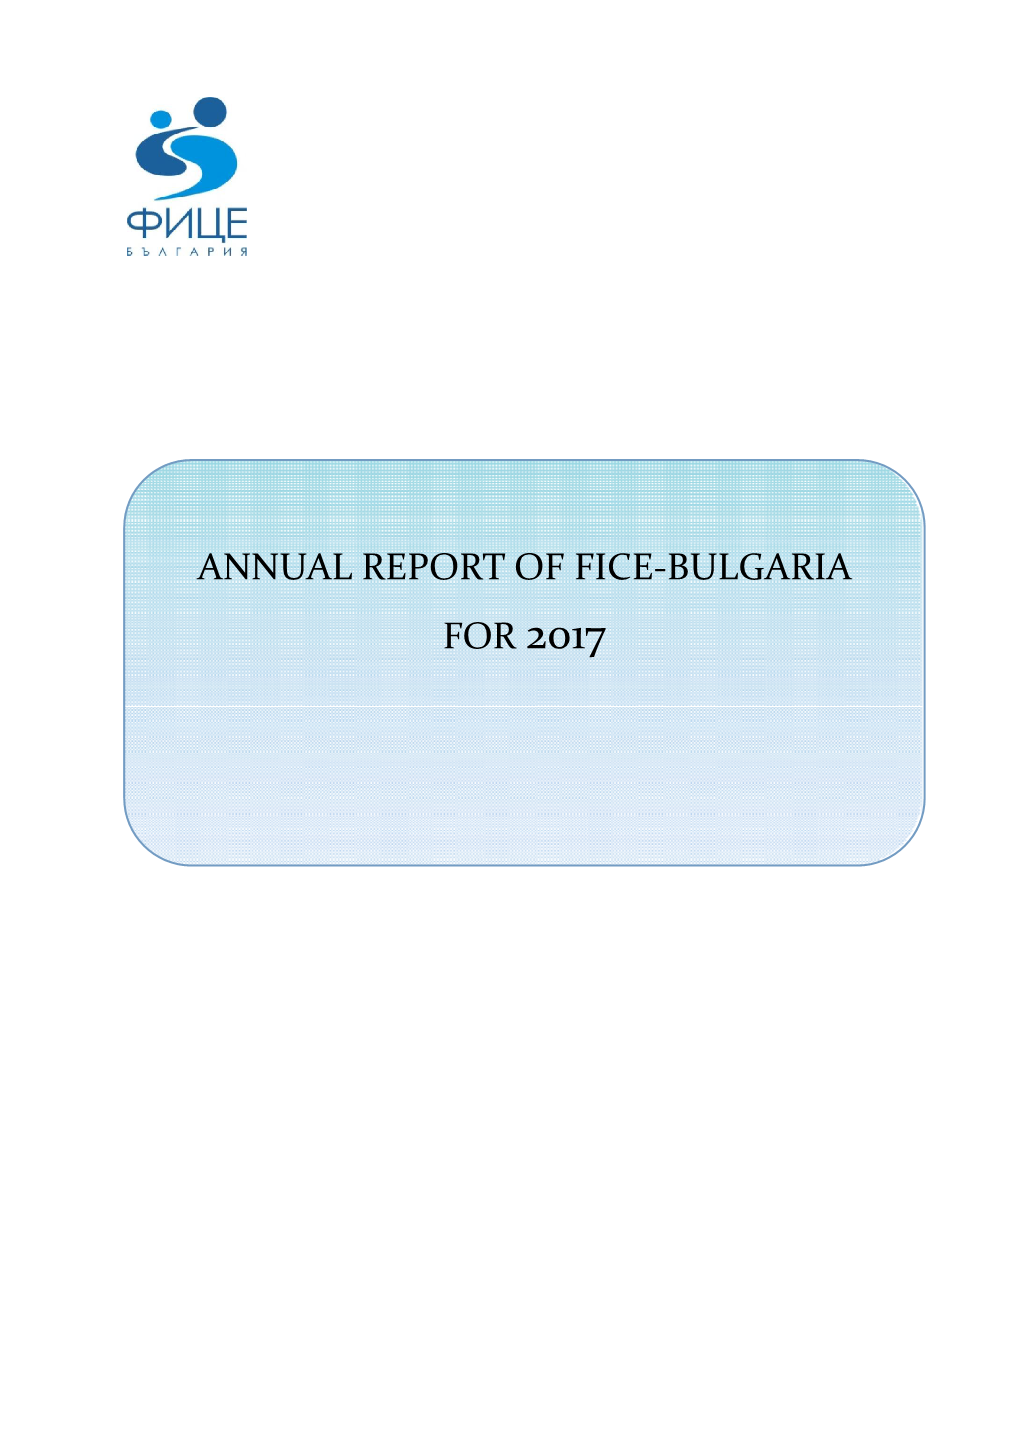 ANNUAL REPORT of FICE-BULGARIA for 2017 Contents